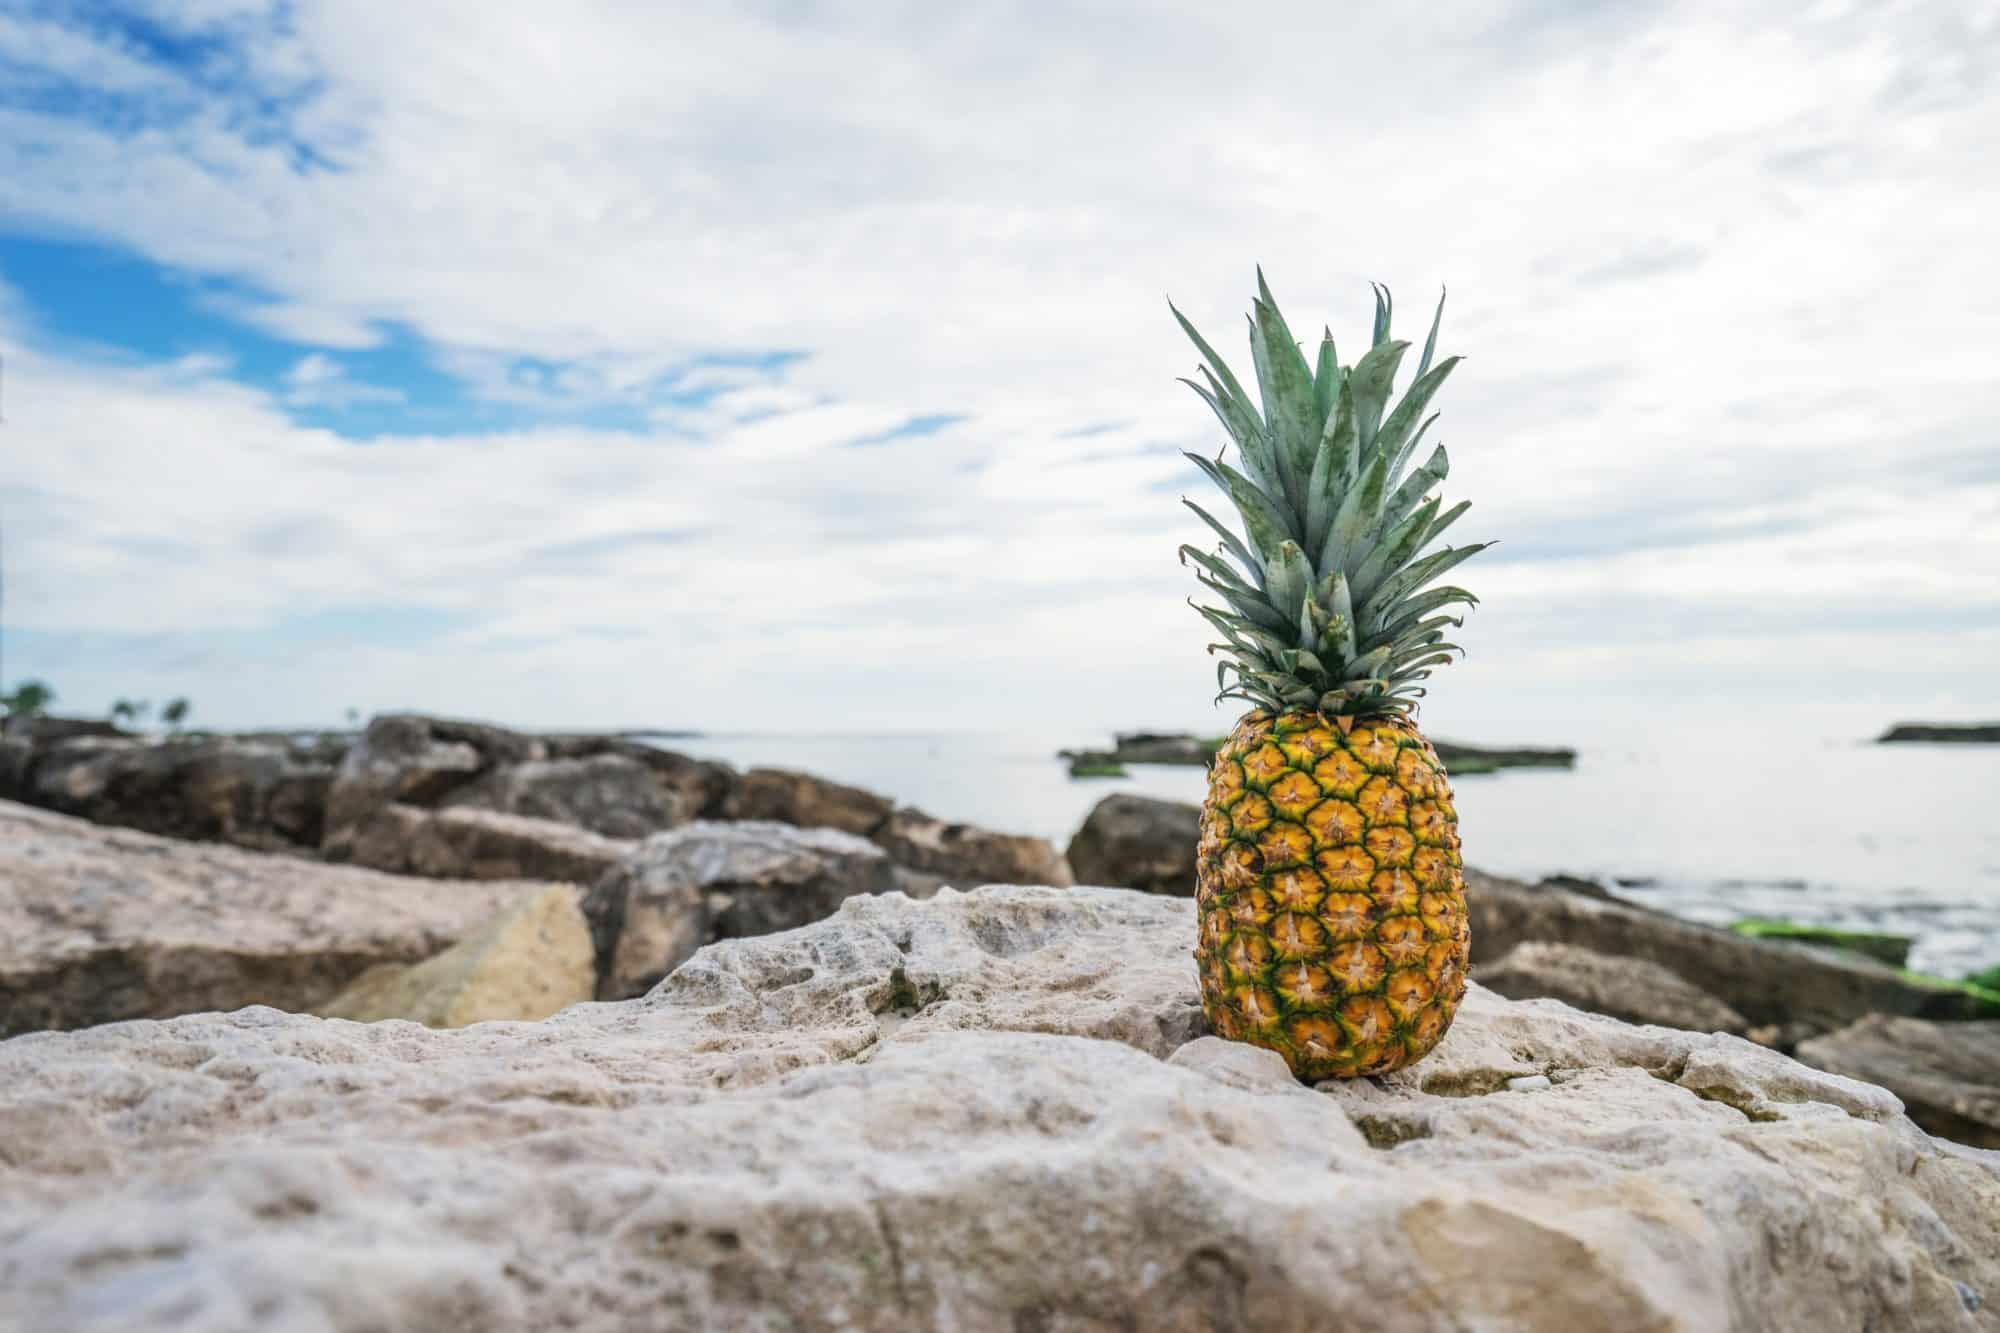 Pineapple on a rocky coast near the water